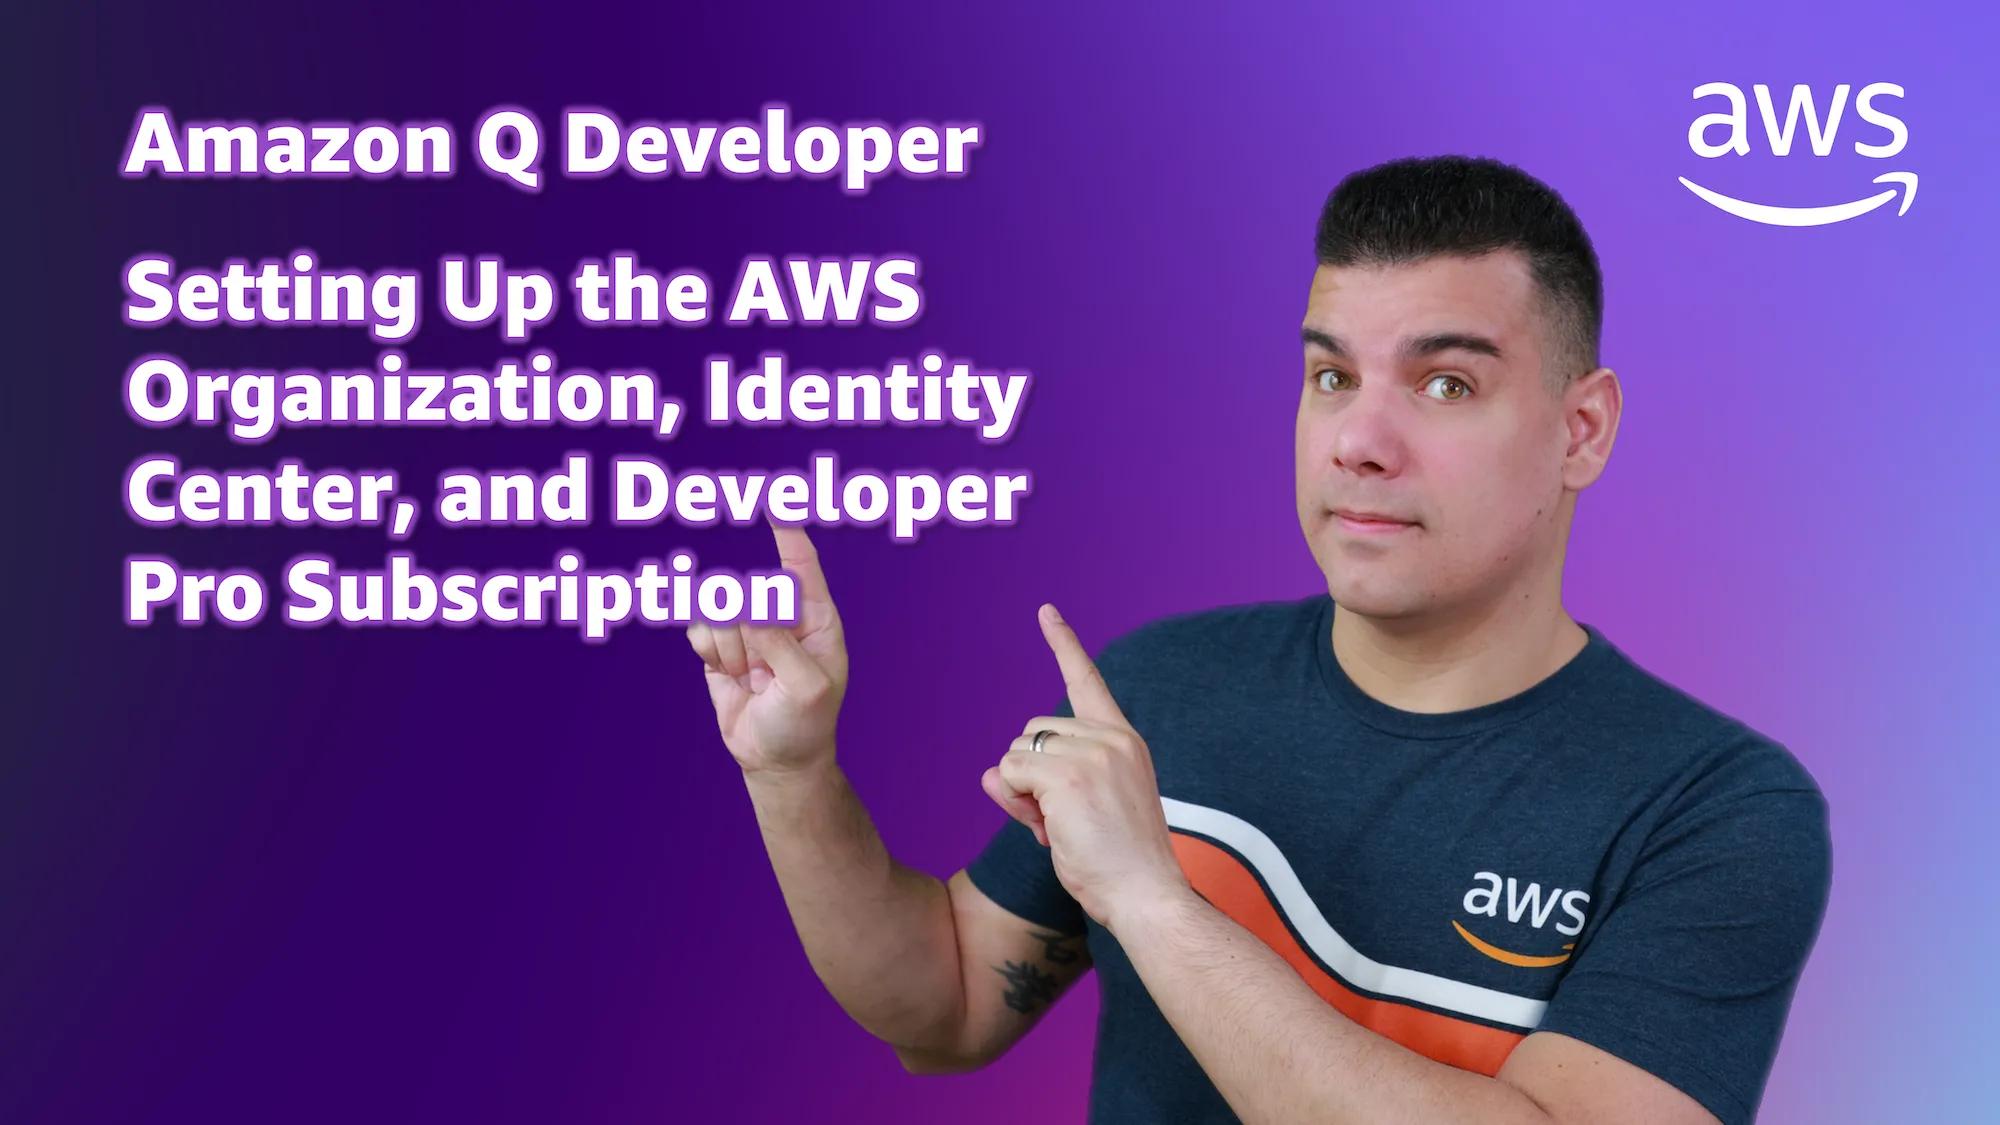 Setting Up the AWS Organization, Identity Center, and the Amazon Q Developer Pro Subscription